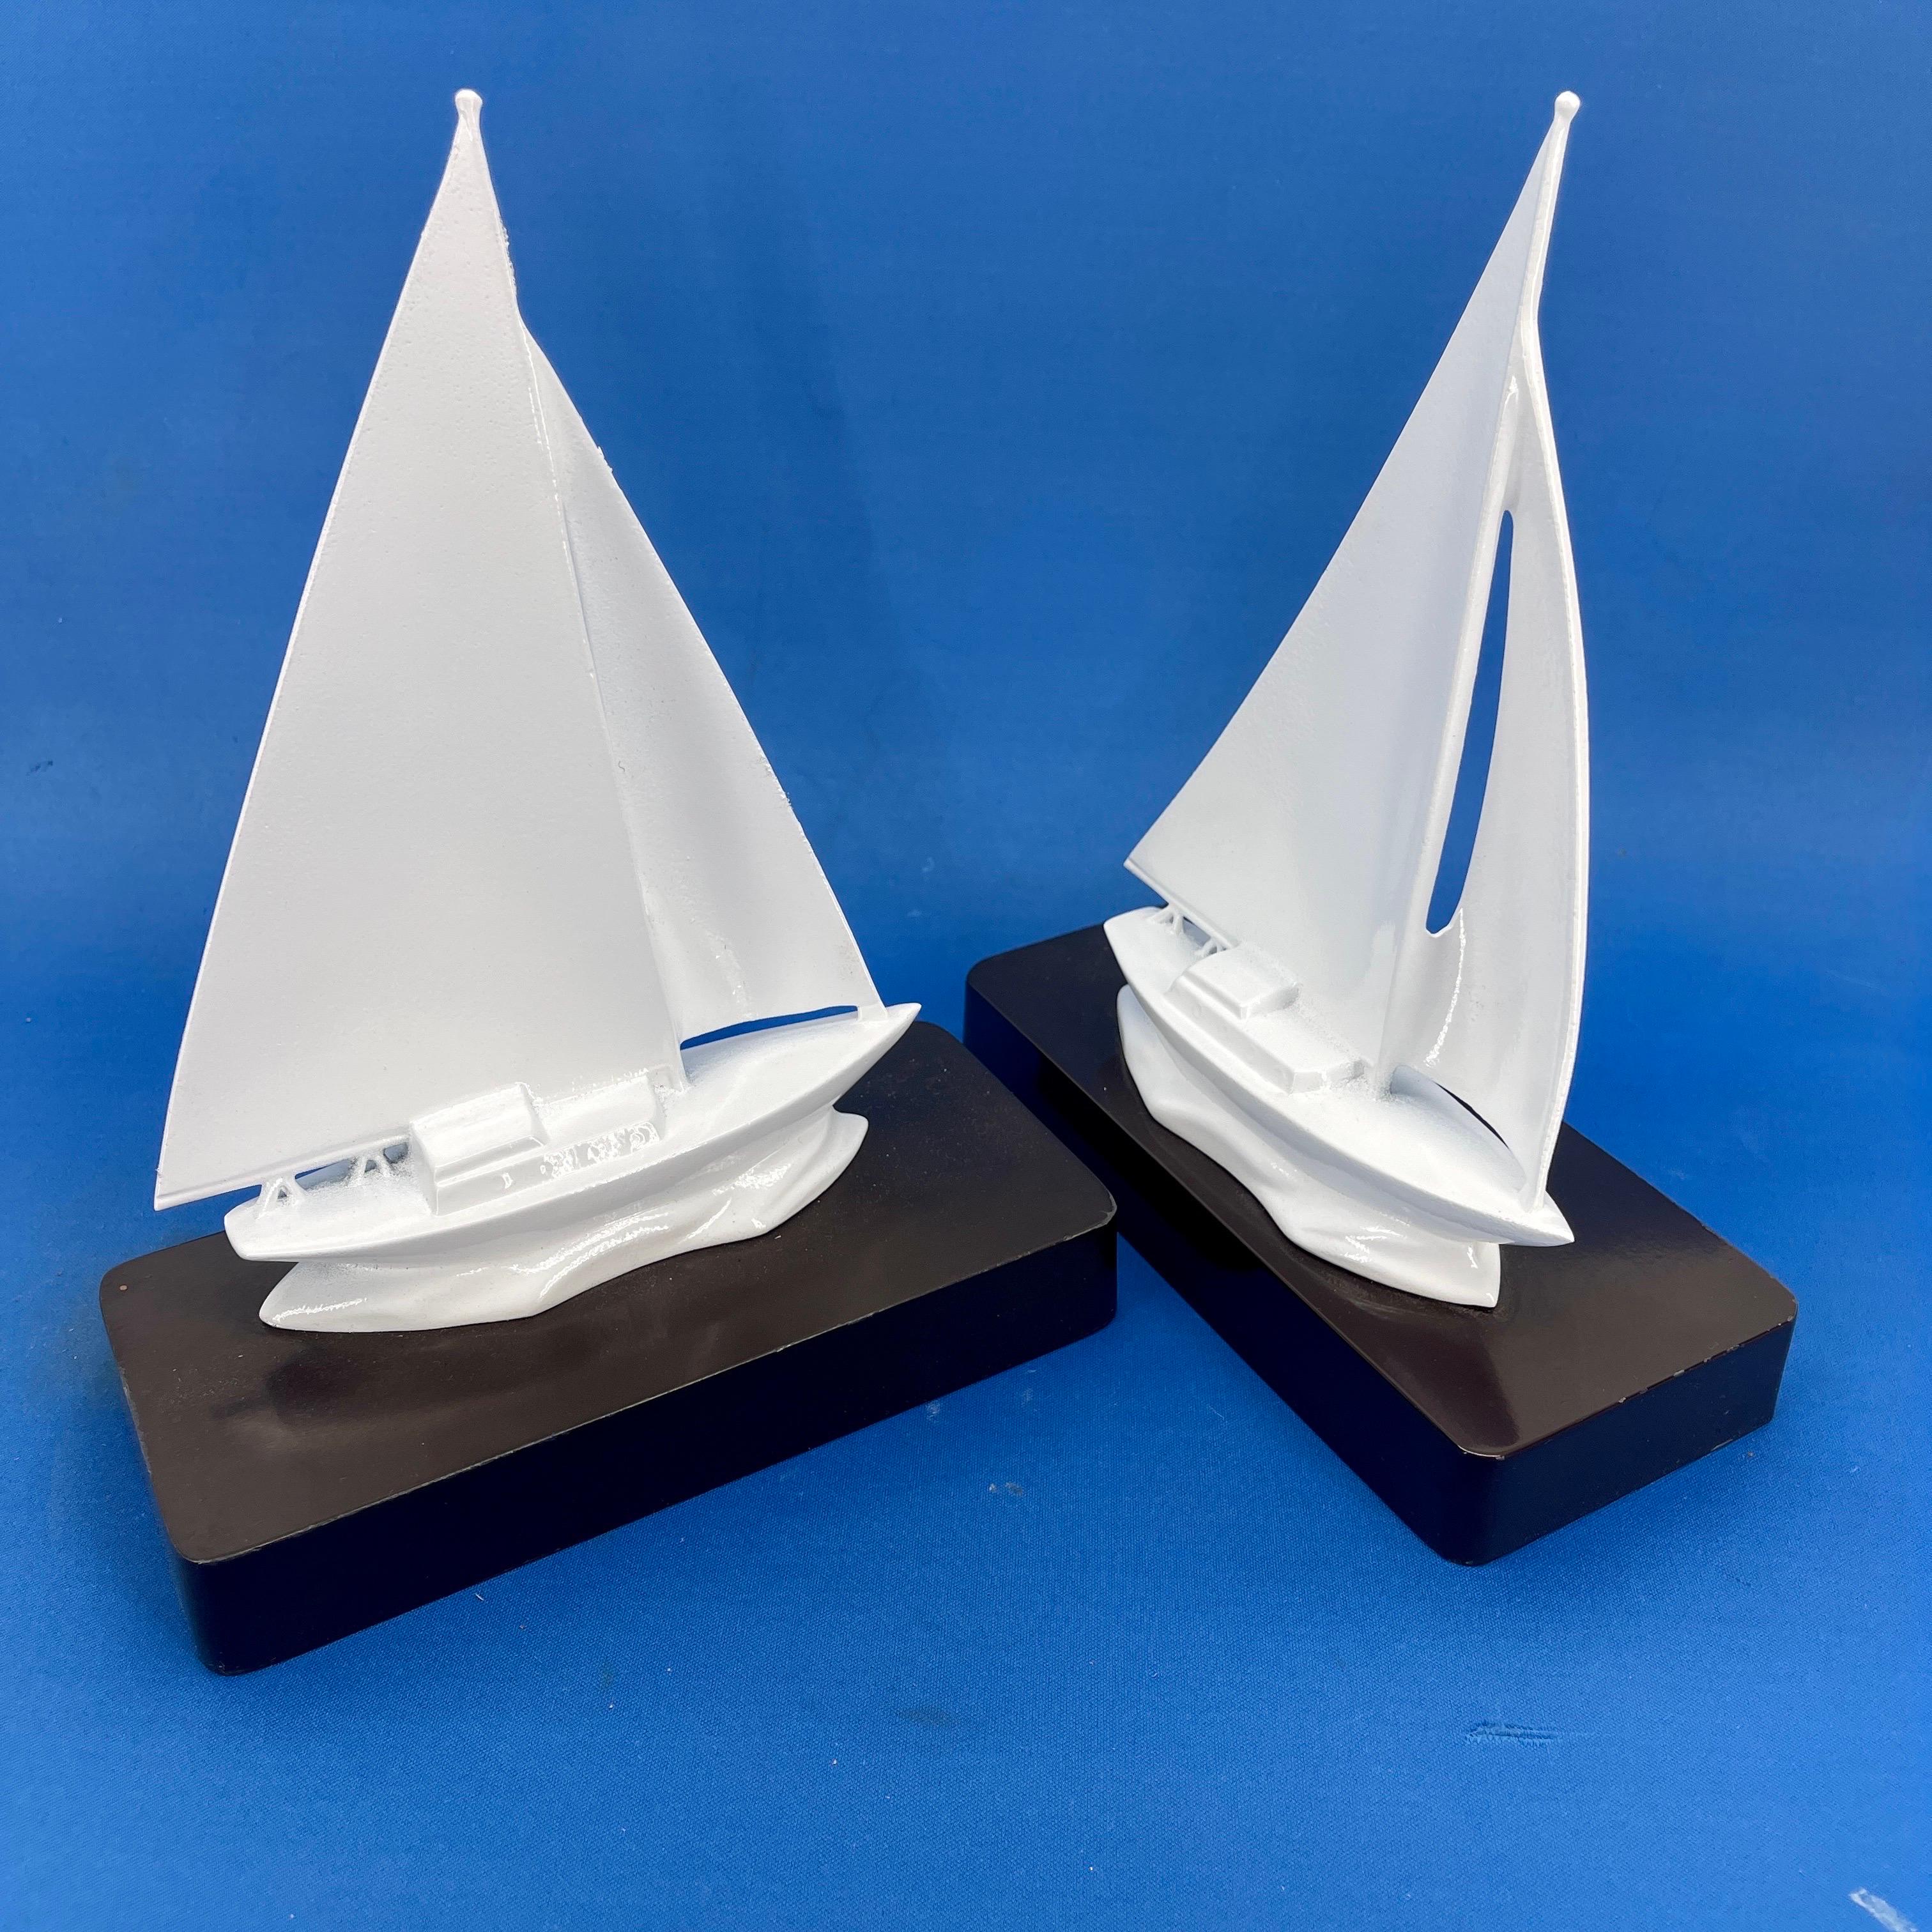 North American Mid-Century Modern Pair of Sailboat Bookends, Powder-Coated White  For Sale